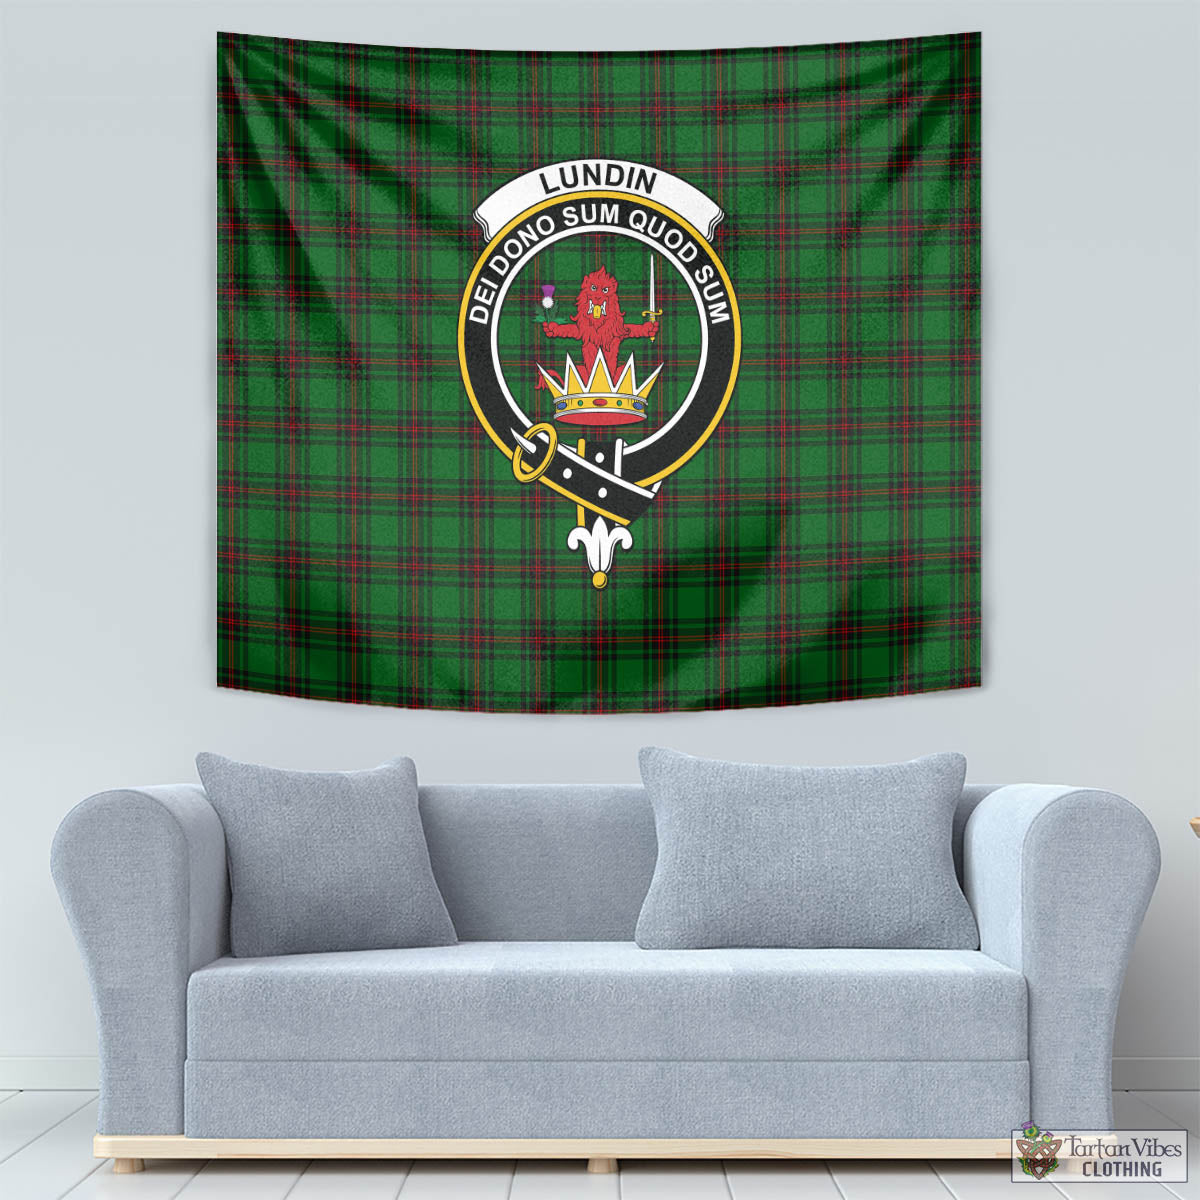 Tartan Vibes Clothing Lundin Tartan Tapestry Wall Hanging and Home Decor for Room with Family Crest